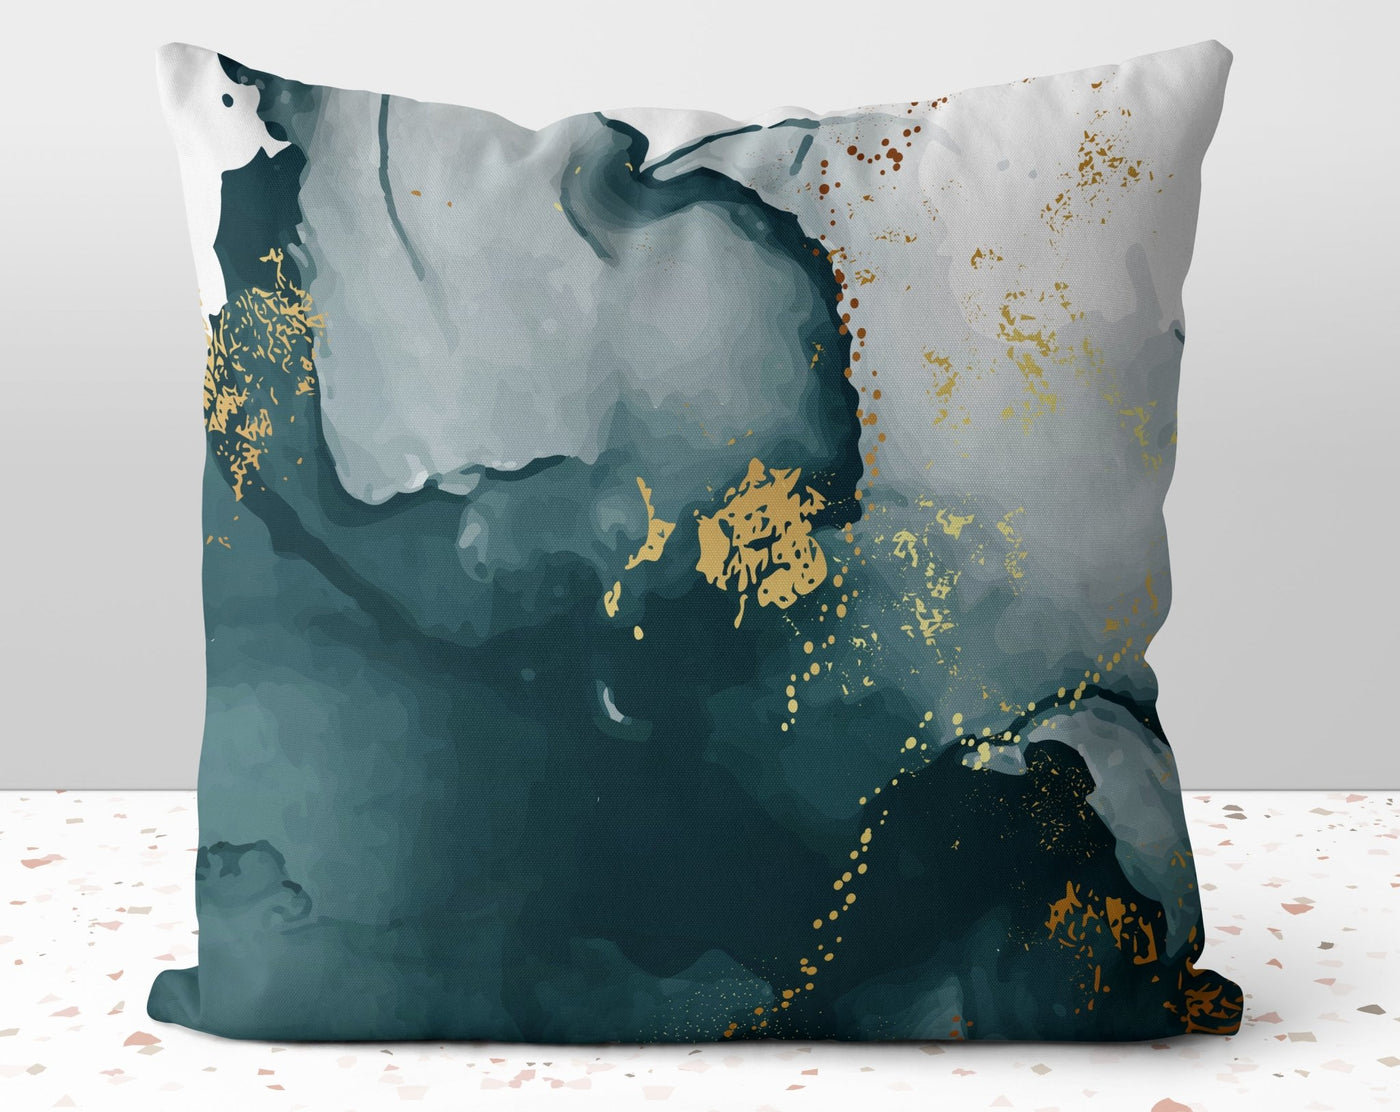 Abstract Marble Emerald Green with Gold Printed Accents Pillow Throw Cover with Insert - Cush Potato Pillows